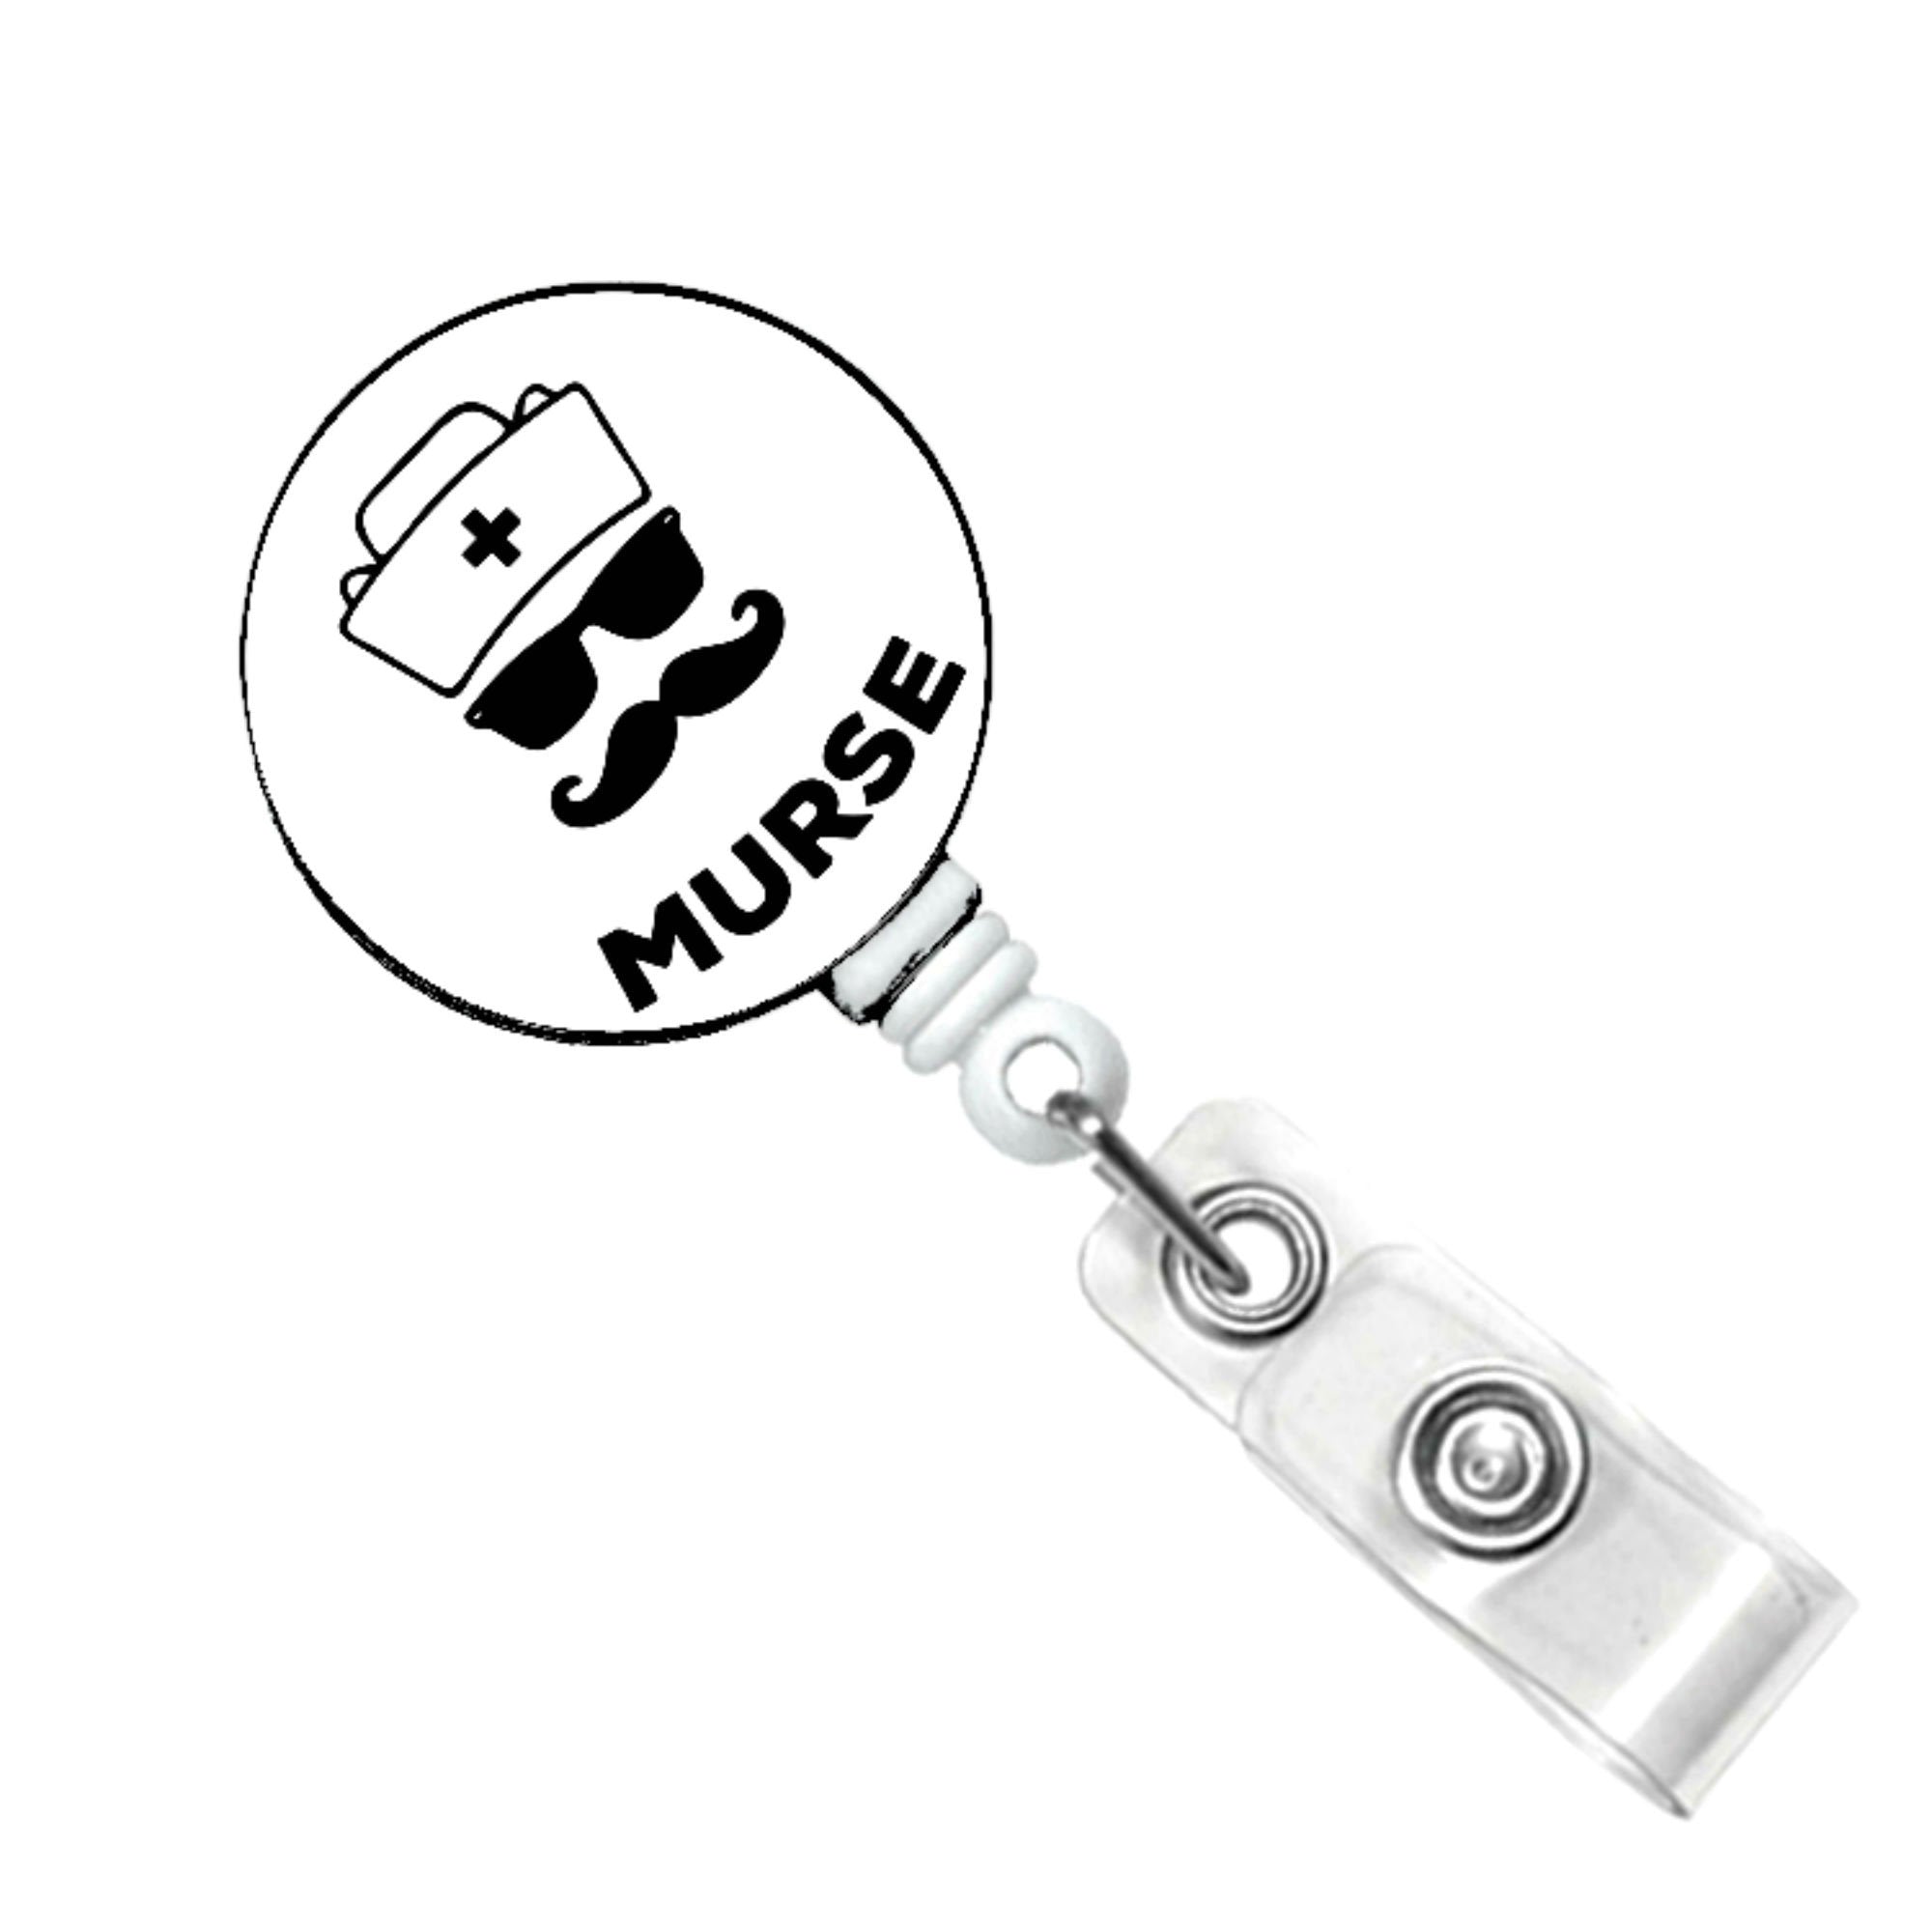 It Takes A Real Man to Be A Nurse - Retractable Badge Reel with Swivel Clip and Extra-Long 34 inch Cord - Badge Holder / Murse / male Nurse / Rn